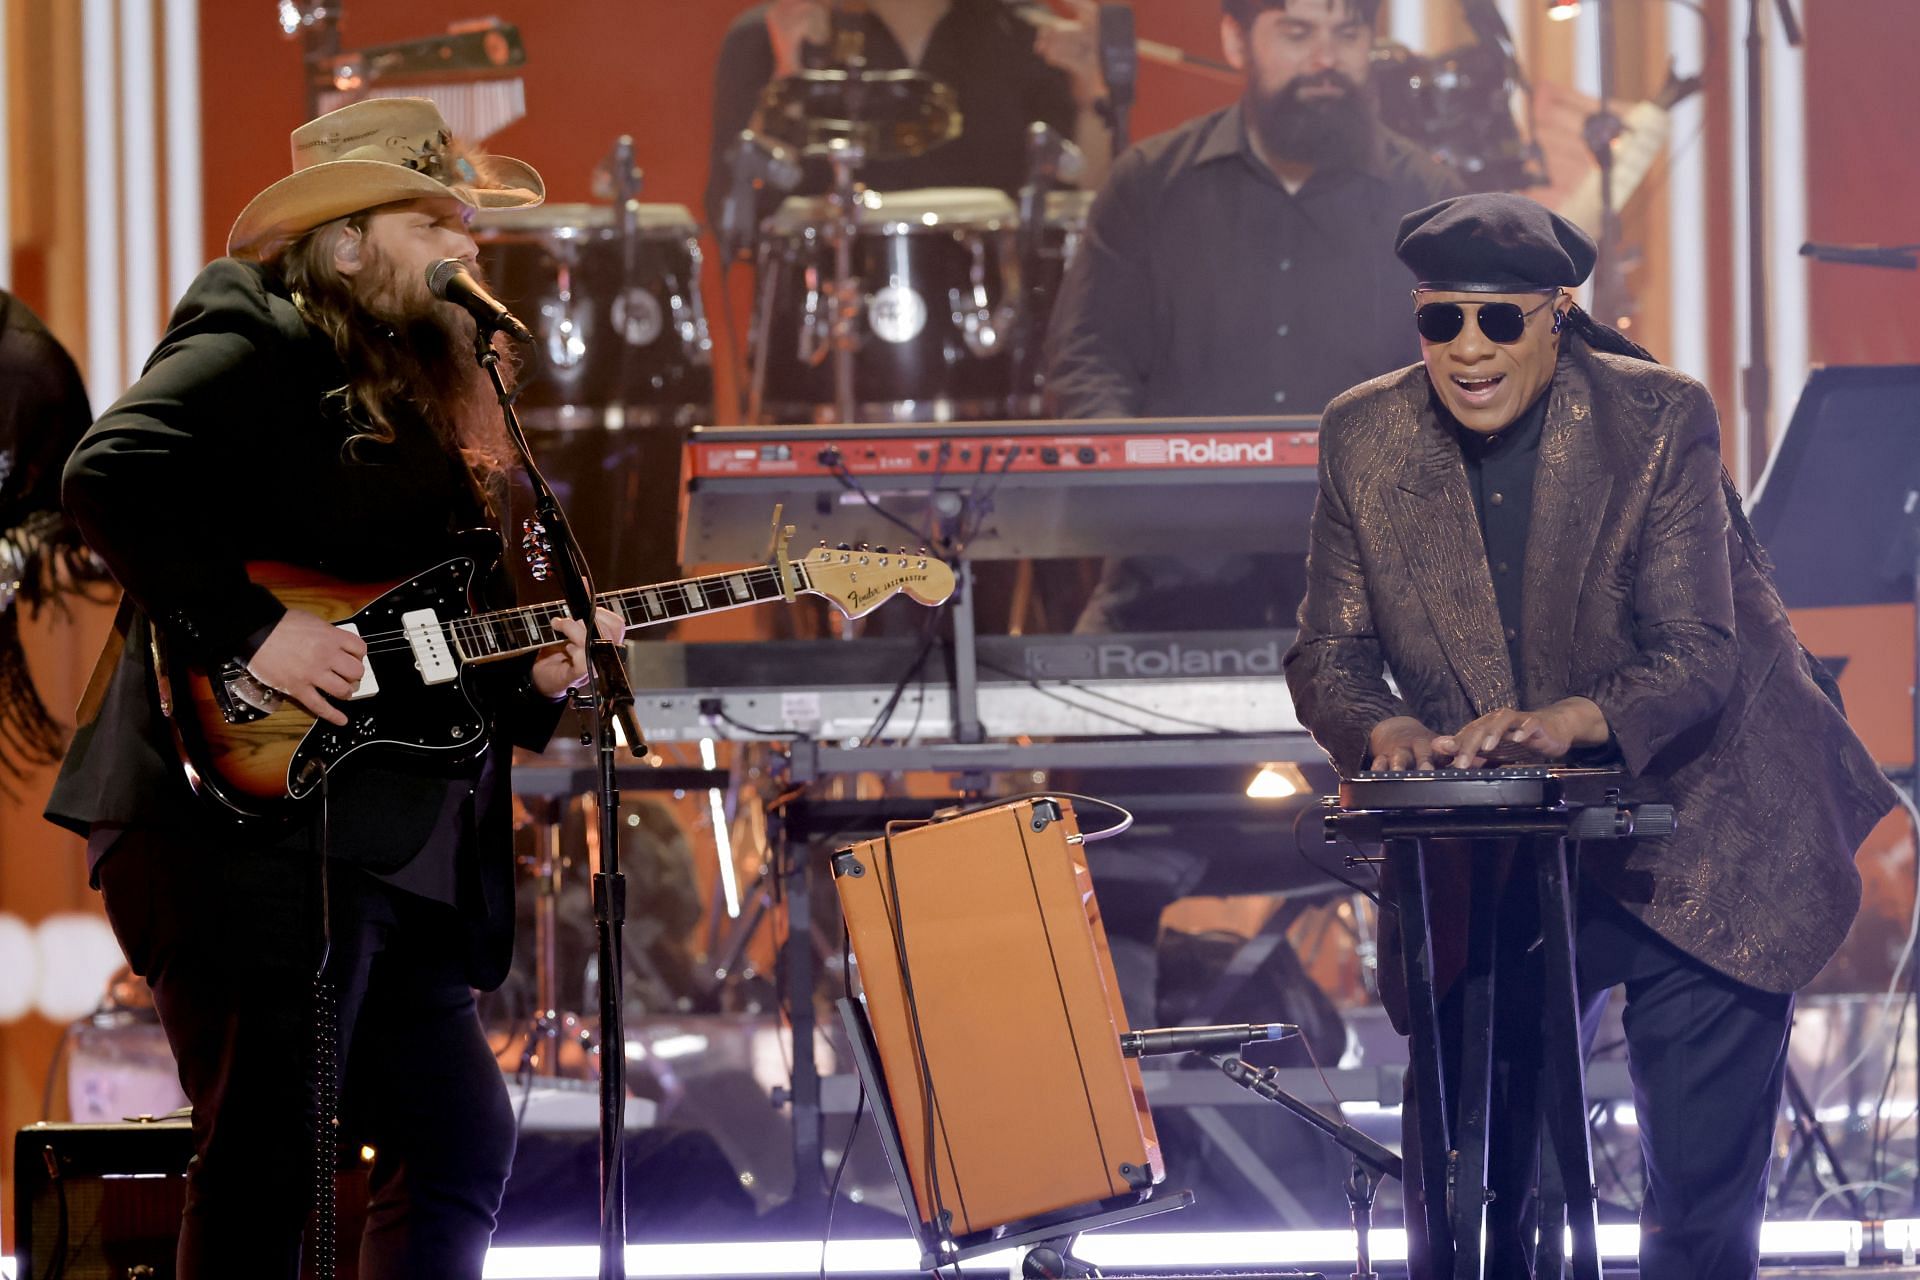 (L-R) Chris Stapleton and Stevie Wonder perform onstage during the Grammy Awards at Crypto.com Arena in Los Angeles, California. (Photo by Kevin Winter/Getty Images)